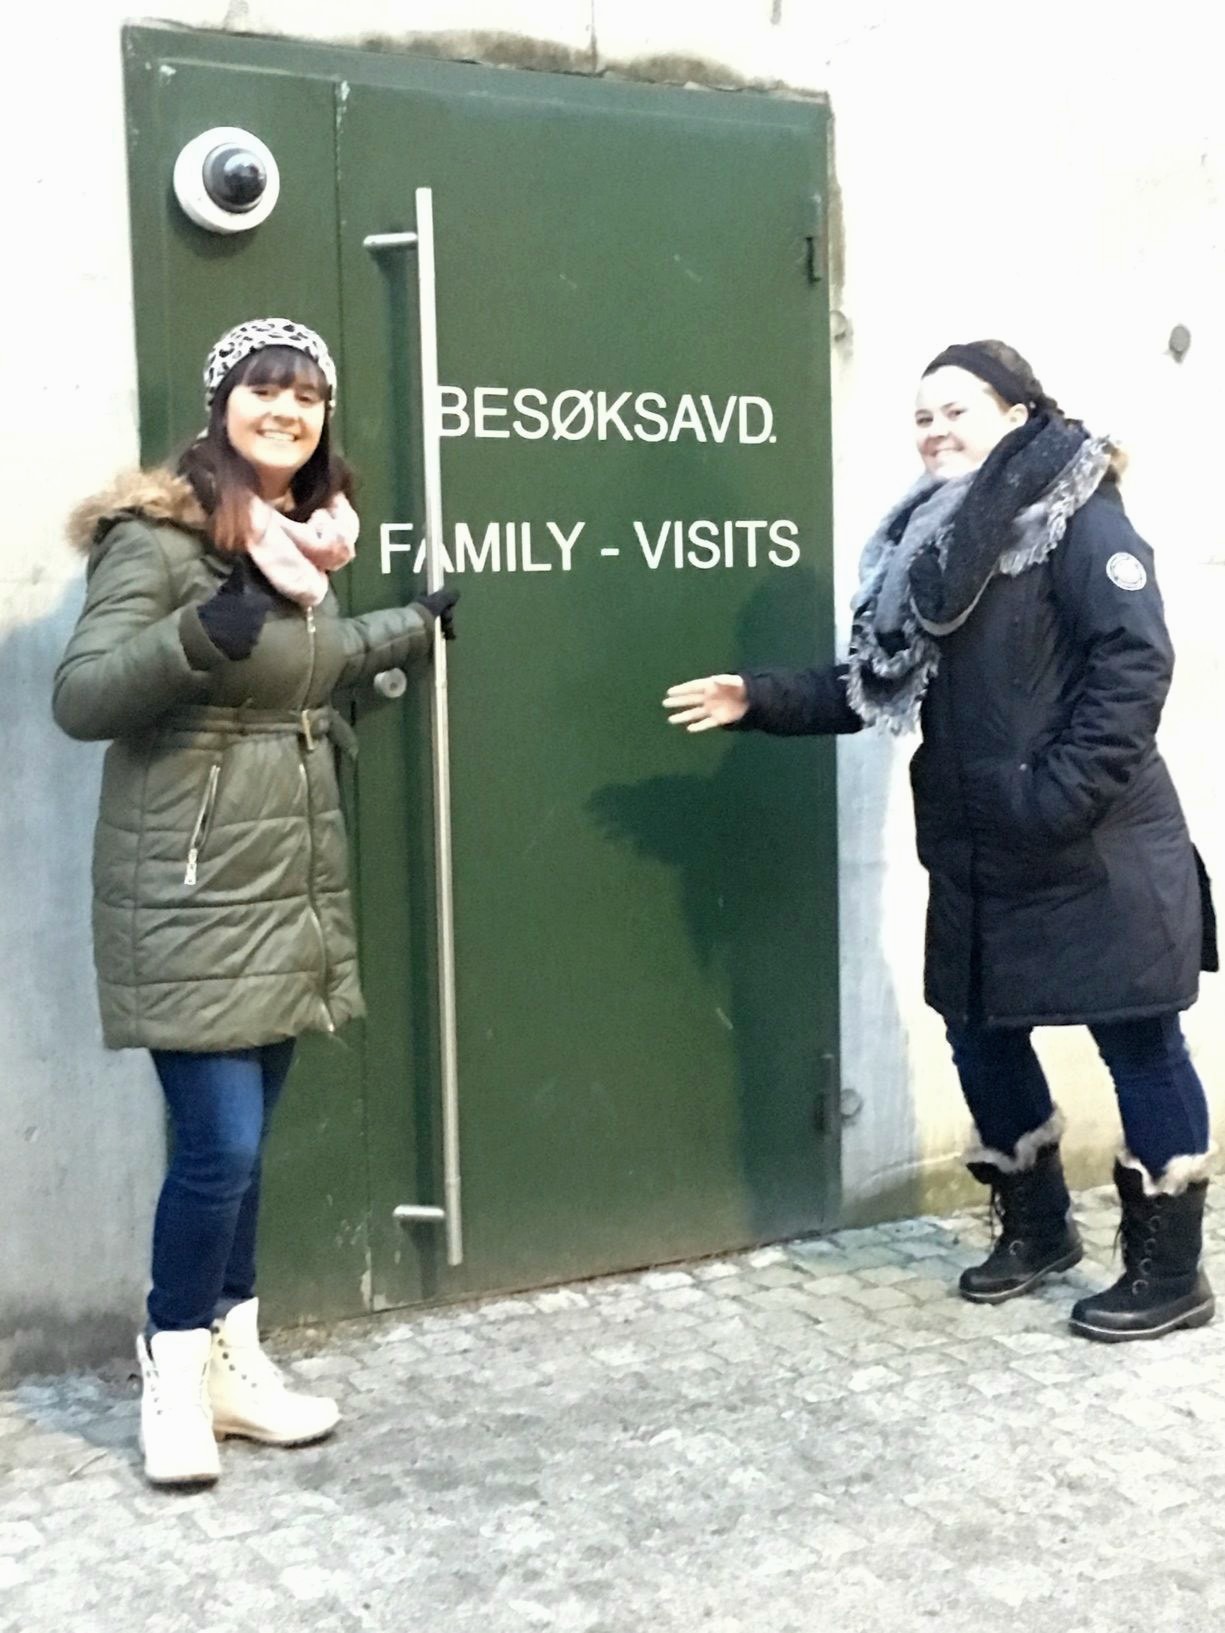 Emma Nolan, left, and Abbey Meyer outside of the family visiting center in Oslo Prison in Norway.